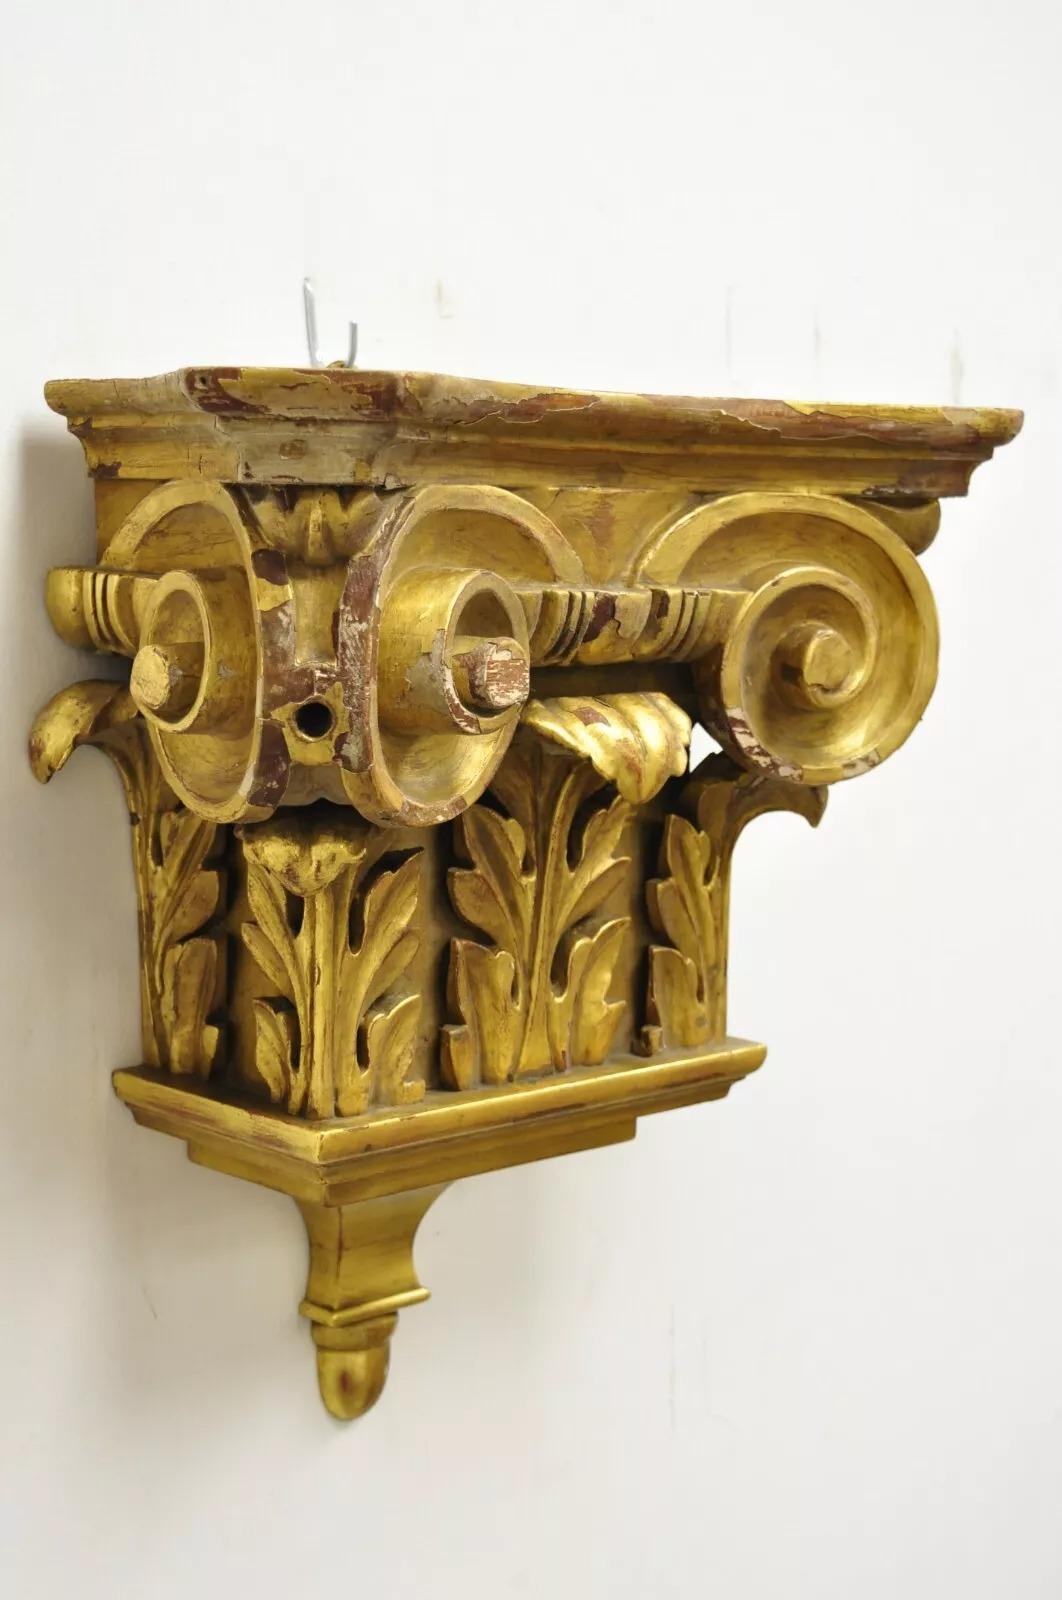 Antique Gold Giltwood French Louis XV Style Wooden Acanthus Corbel Wall Bracket Shelf. Circa 19th Century. Measurements: 18